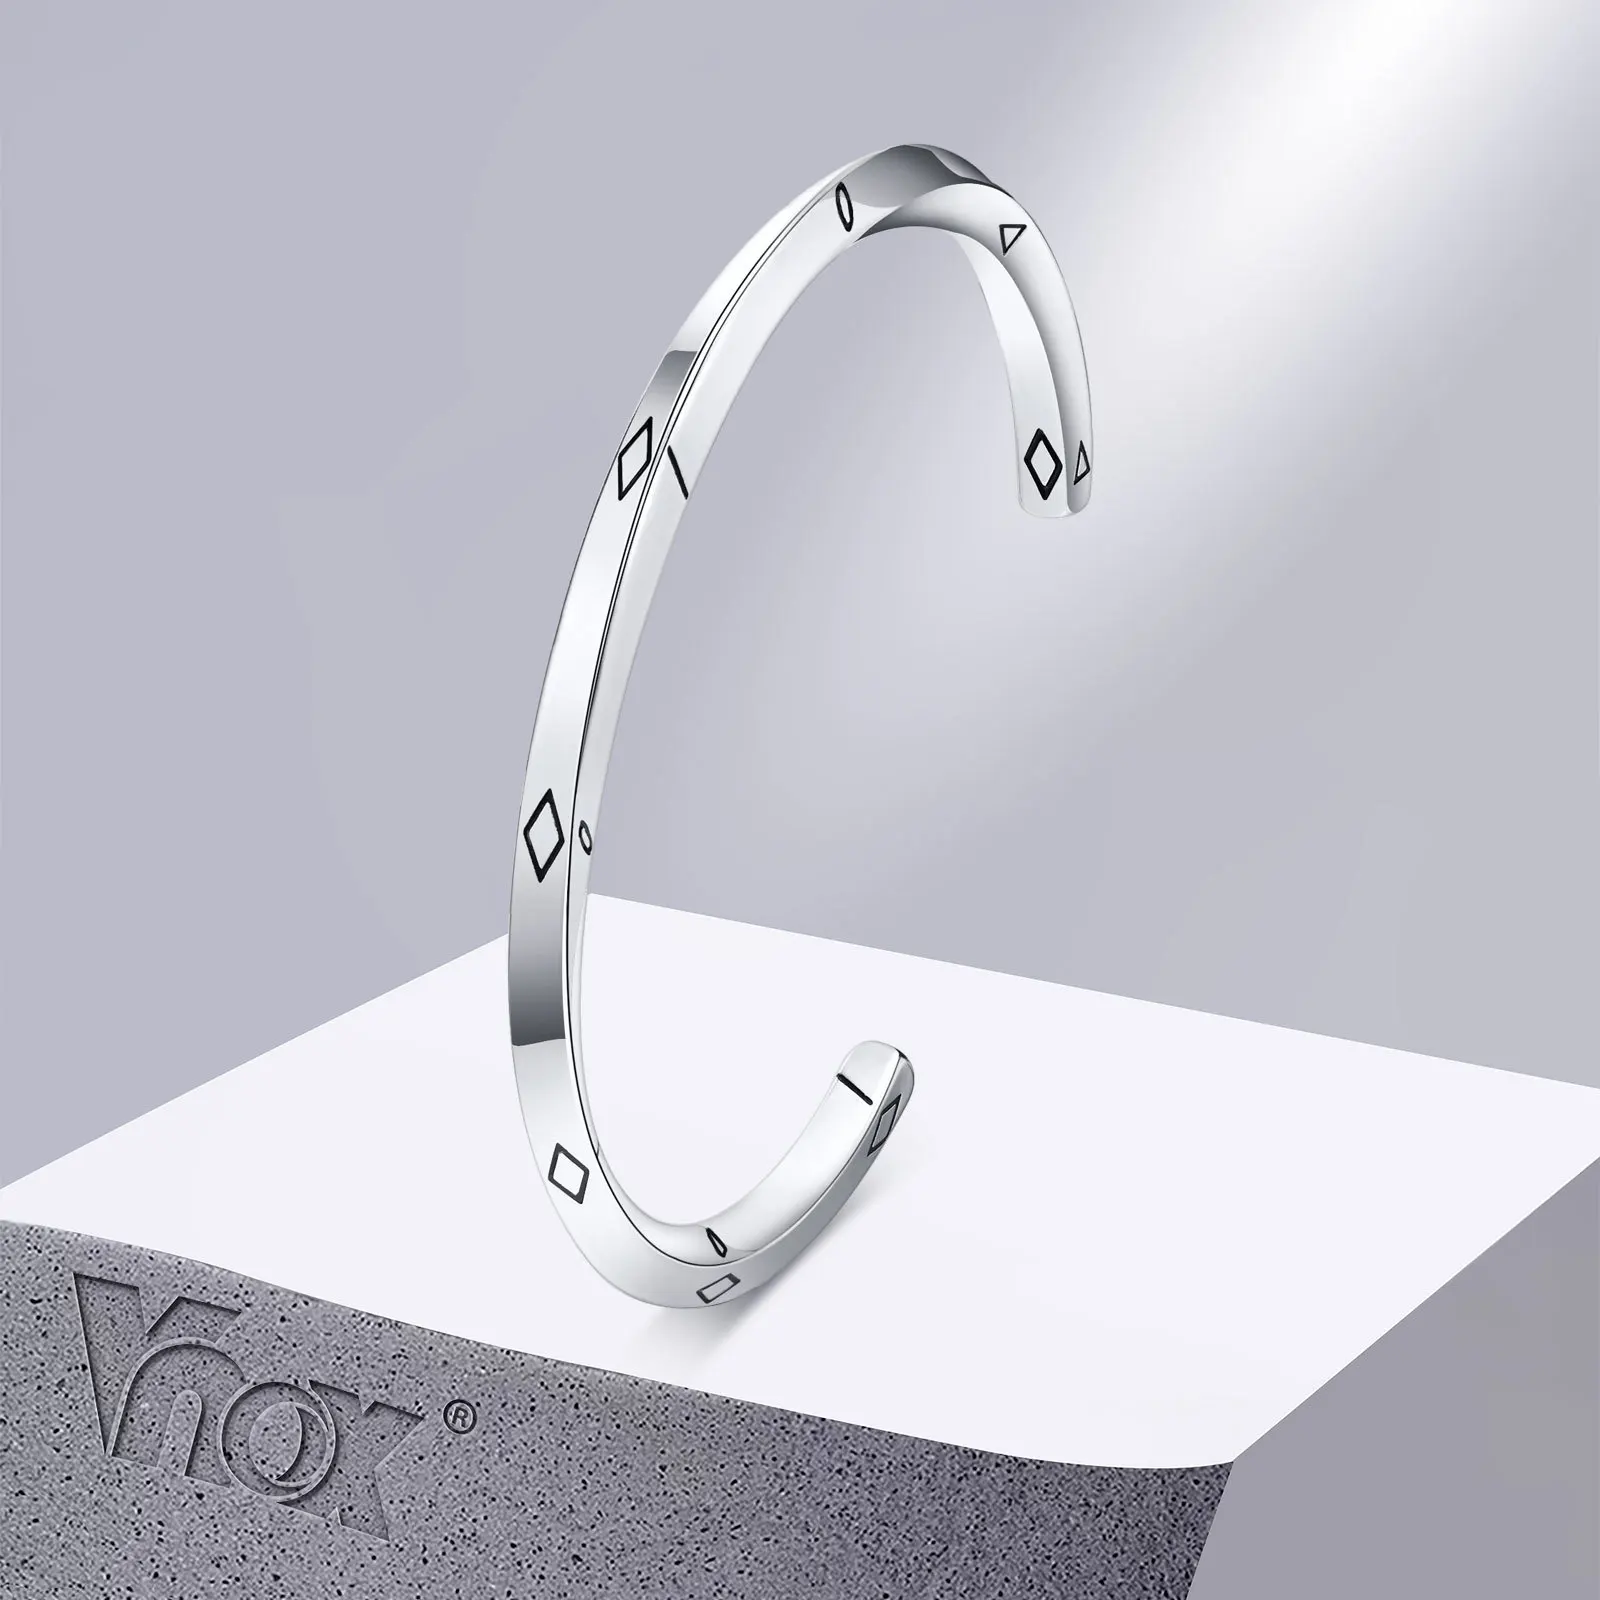 

Vnox Norse Viking Mobius Cuff Bangle for Men, 4MM Stainless Steel Opening Twisted Mantra Bracelet, Amulet Jewelry Gift